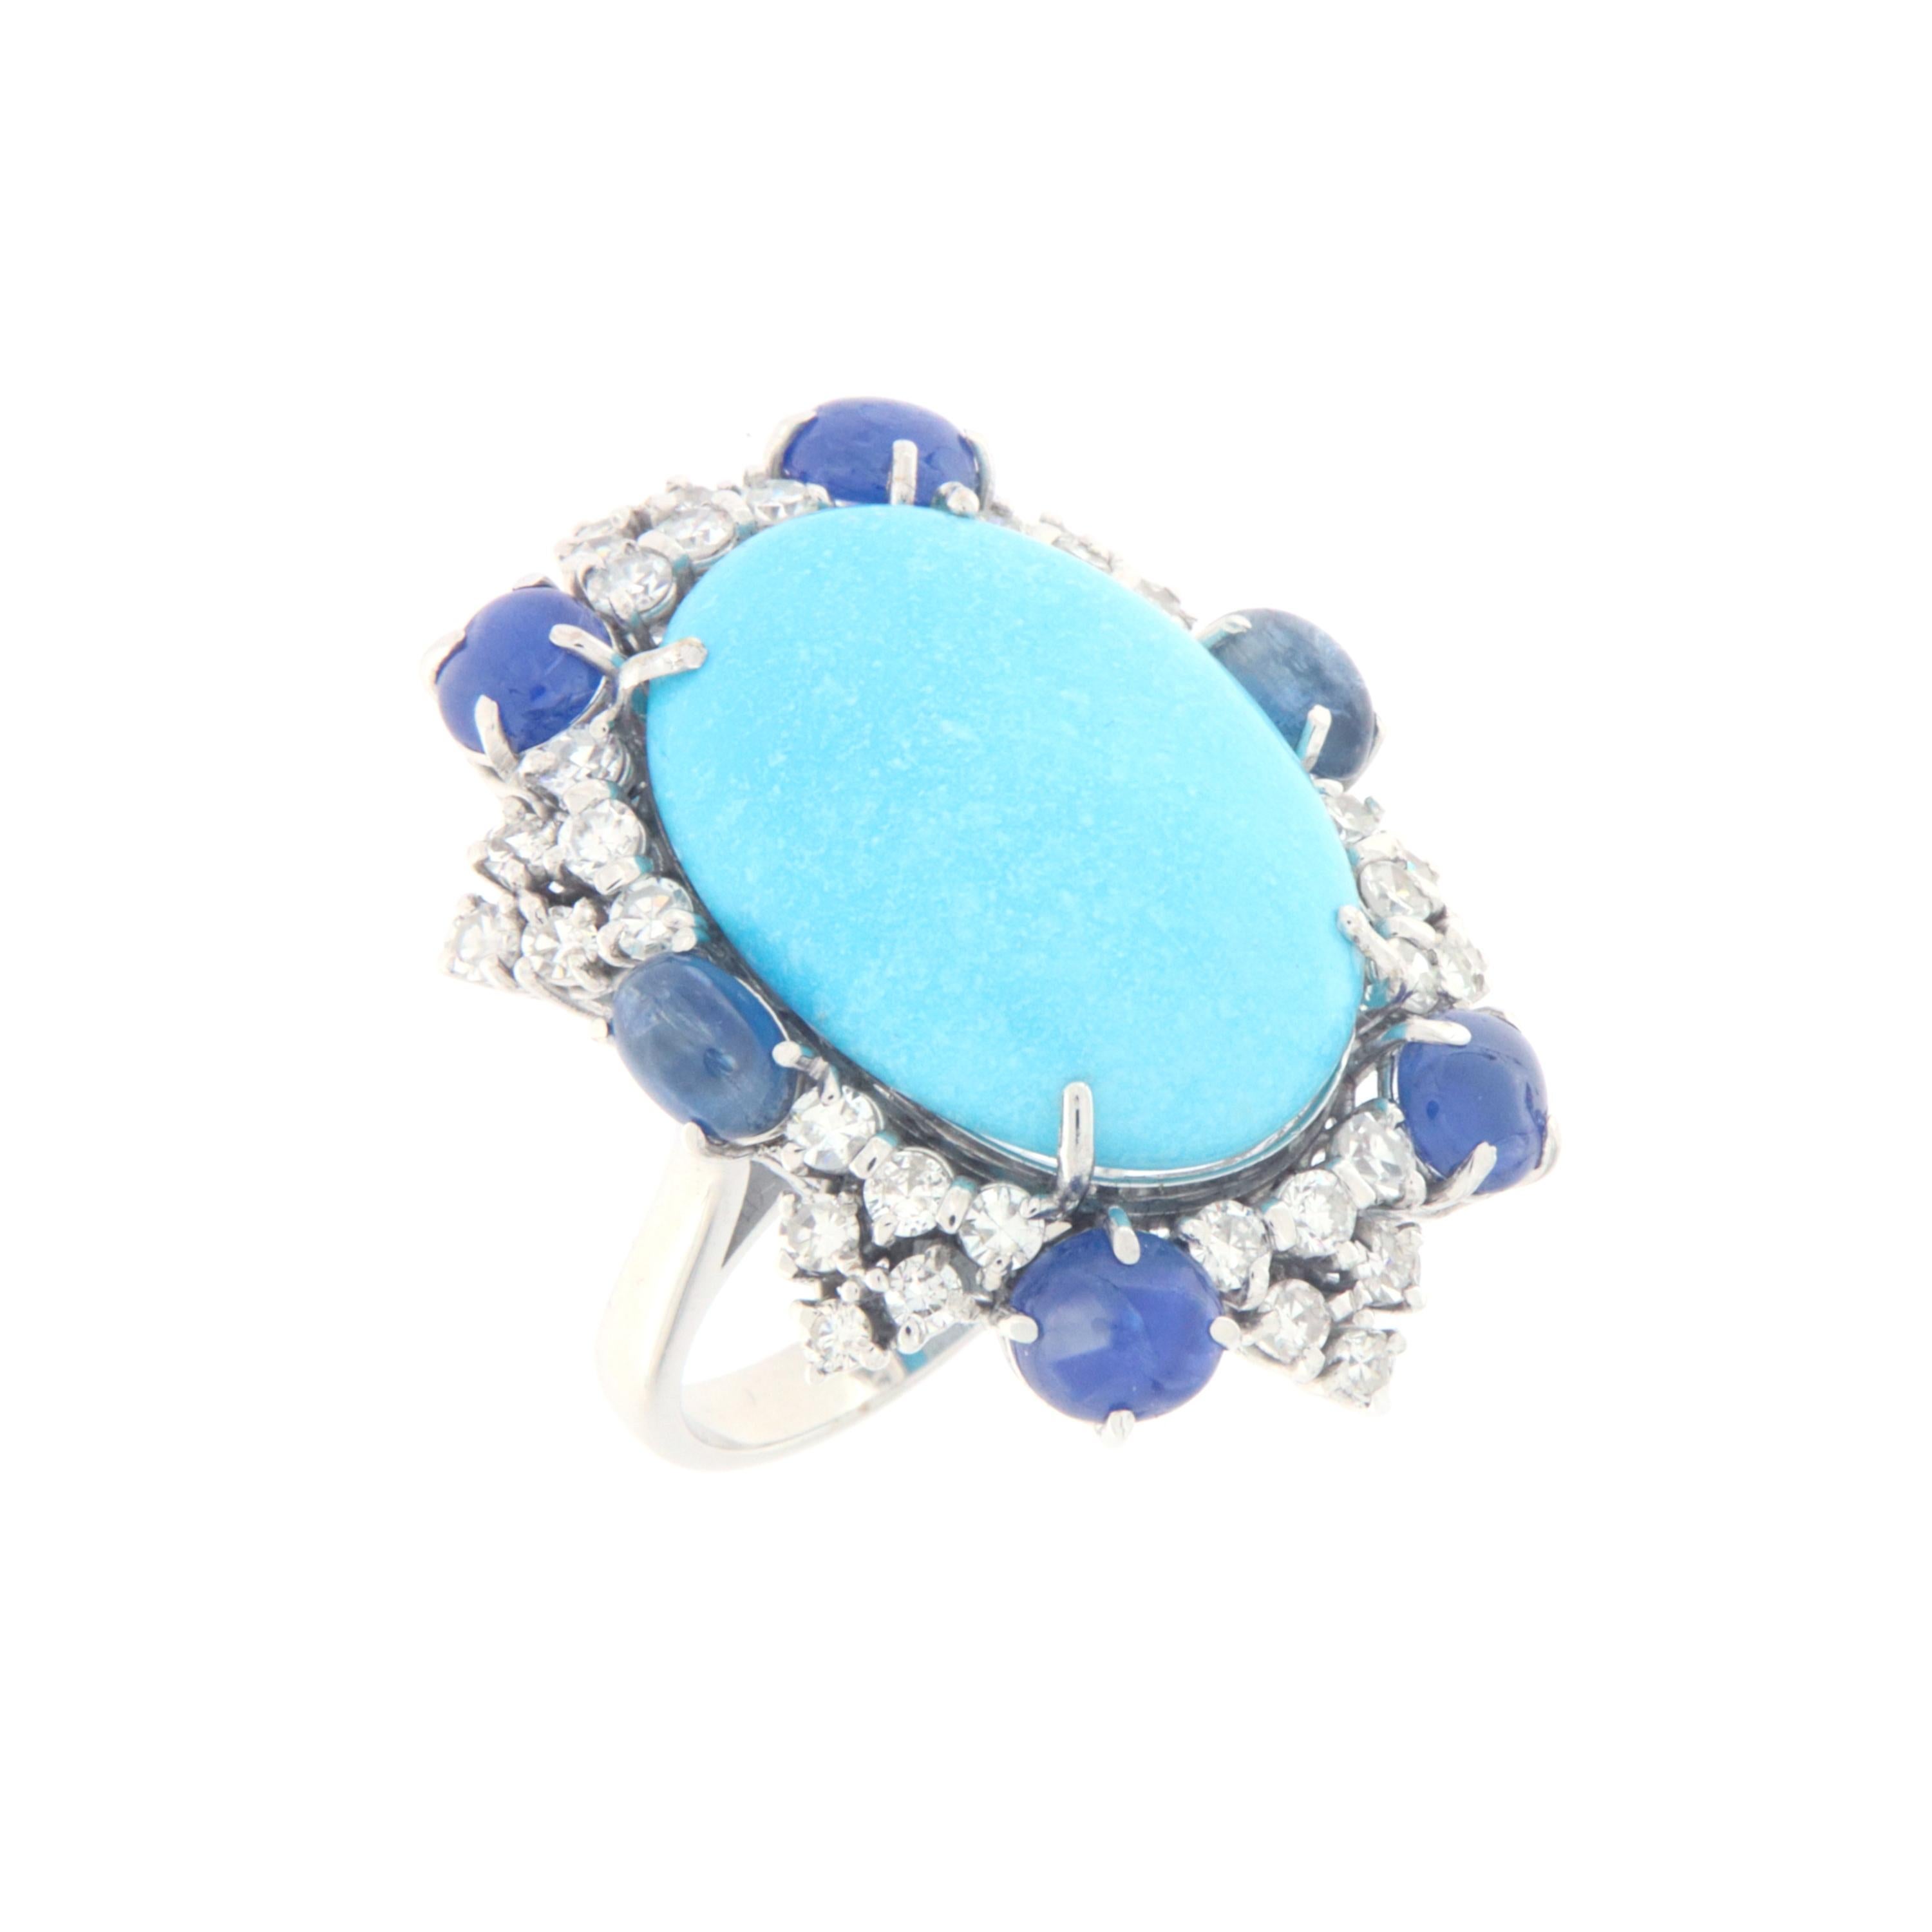 Fantastic ring made of 18 carat white gold with diamonds,sapphires and natural turquoise, entirely handmade by expert craftsmen in the sector.
The turquoise present on the ring recalls the colors of the sea and evokes the arrival of summer, making